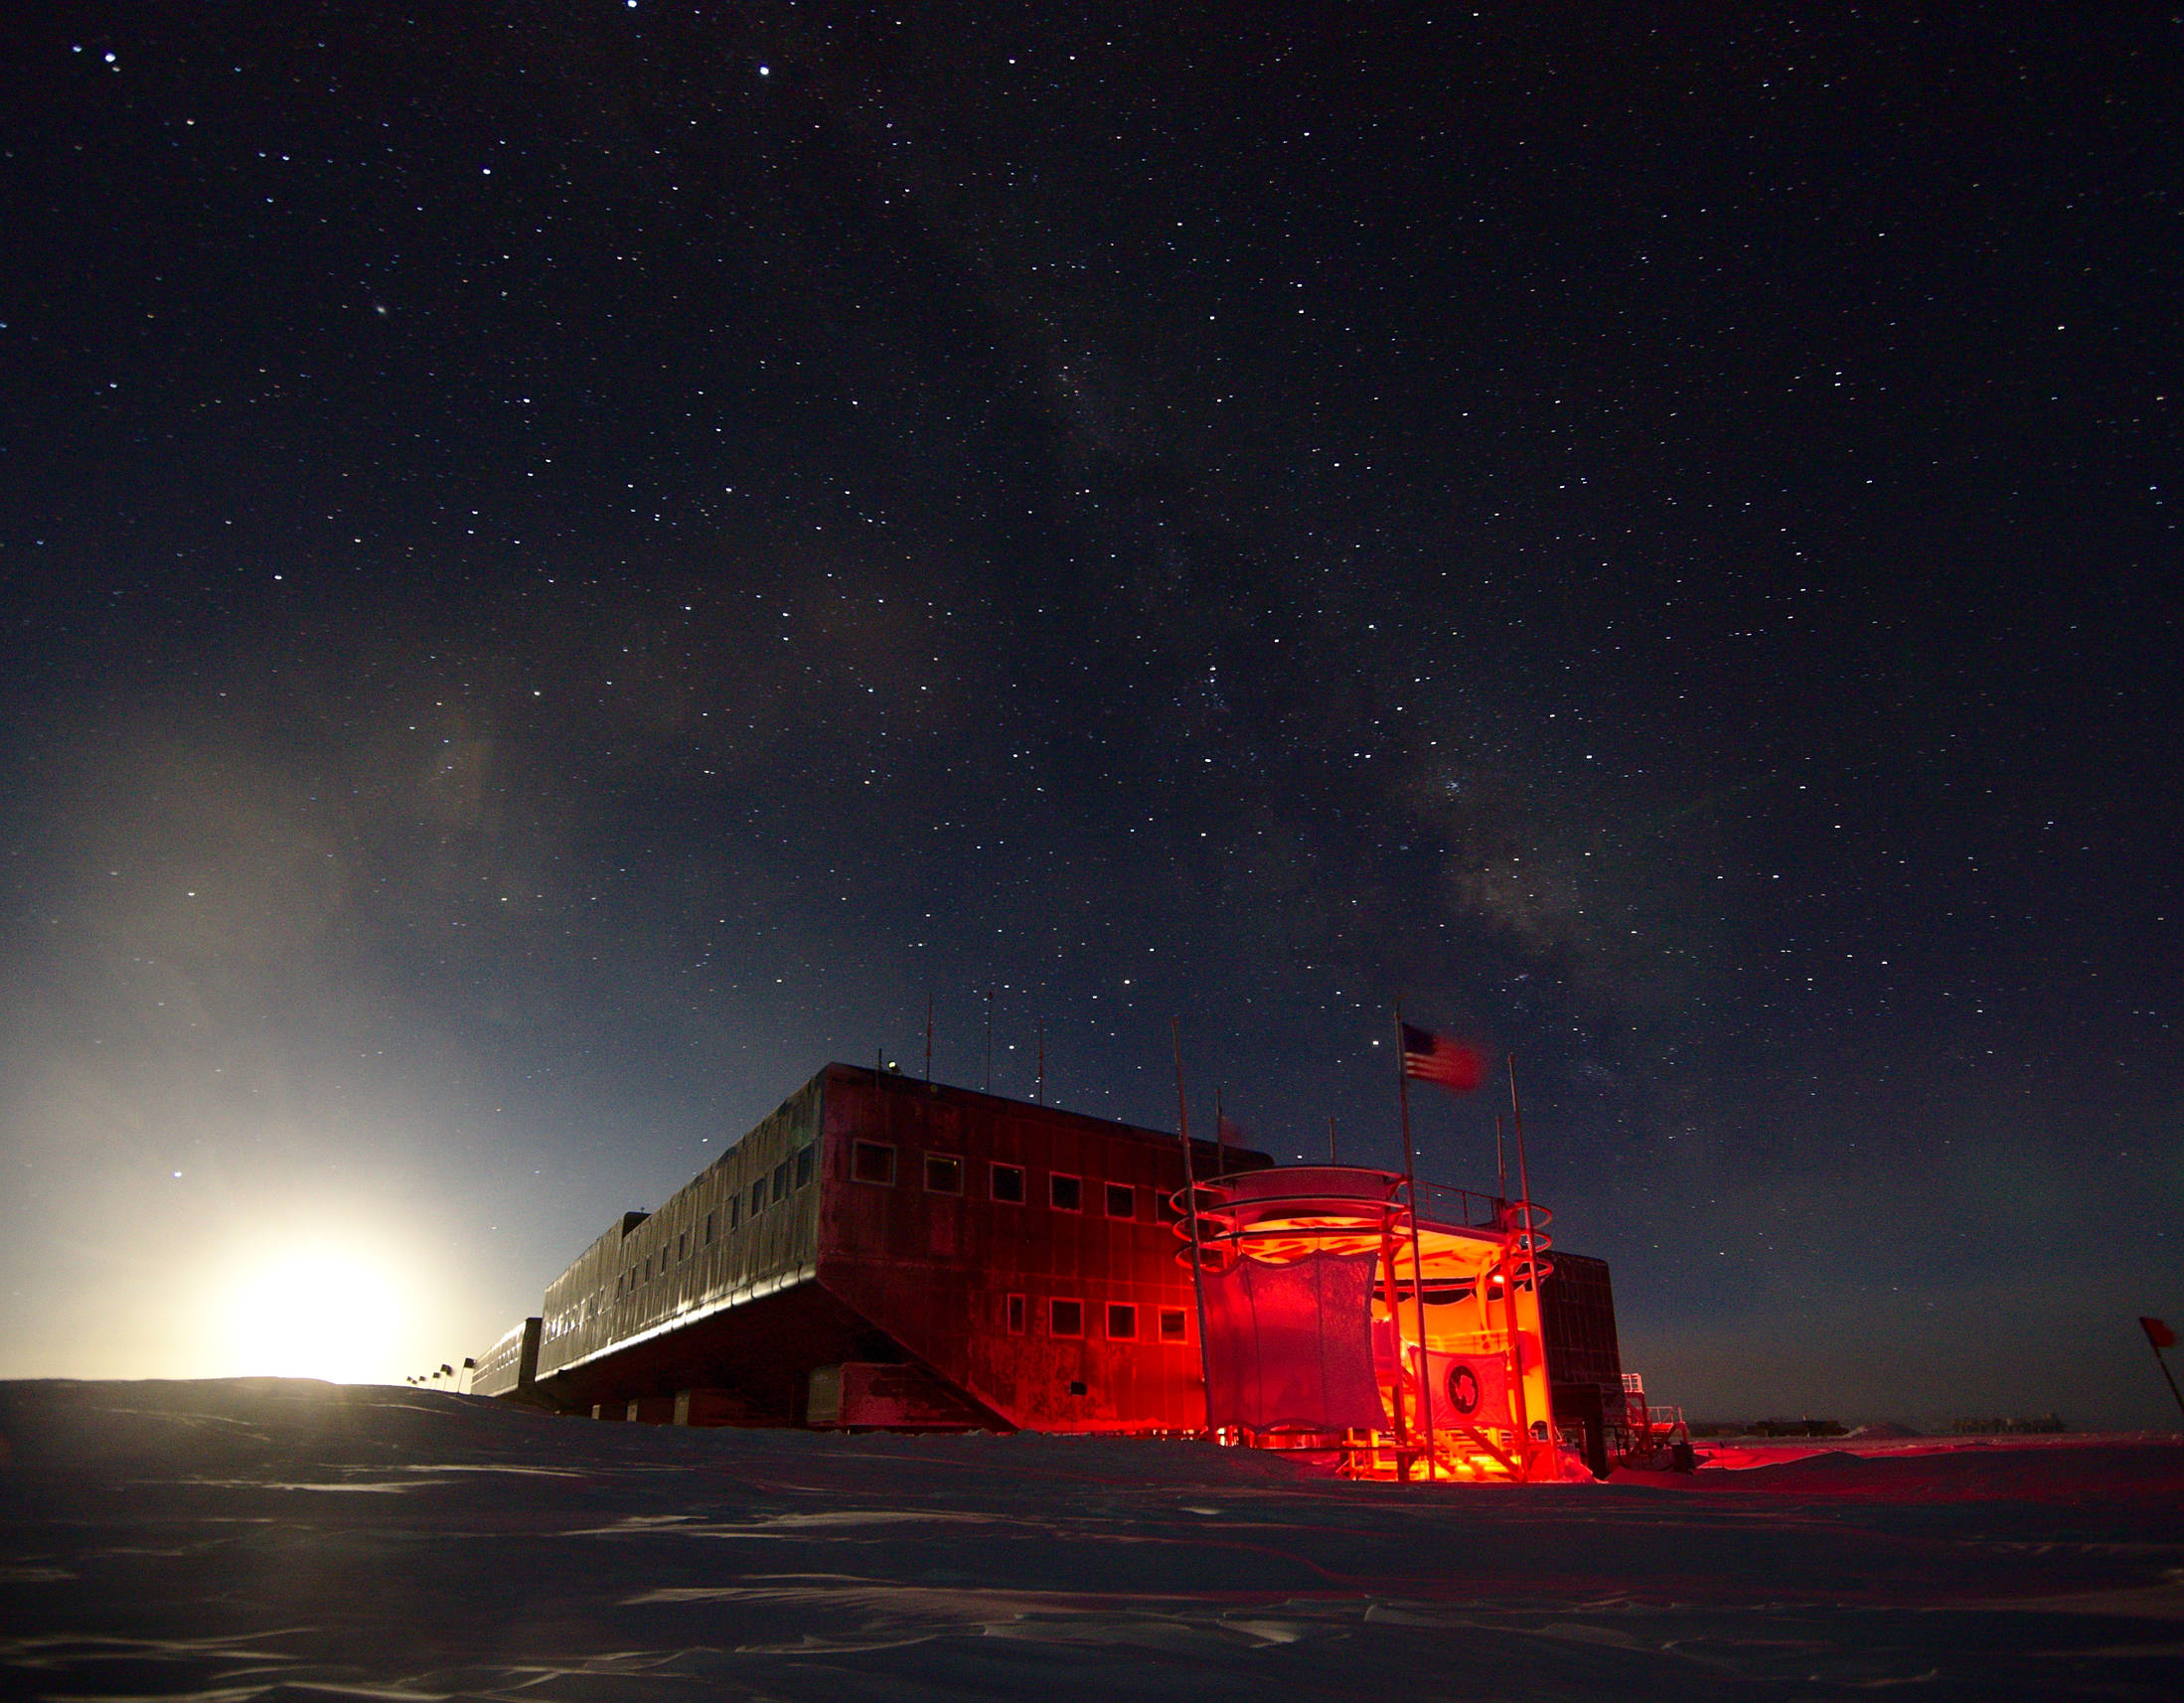 The entrance to the Amundsen-Scott research station. The bright light of the Moon illuminates the side of the station